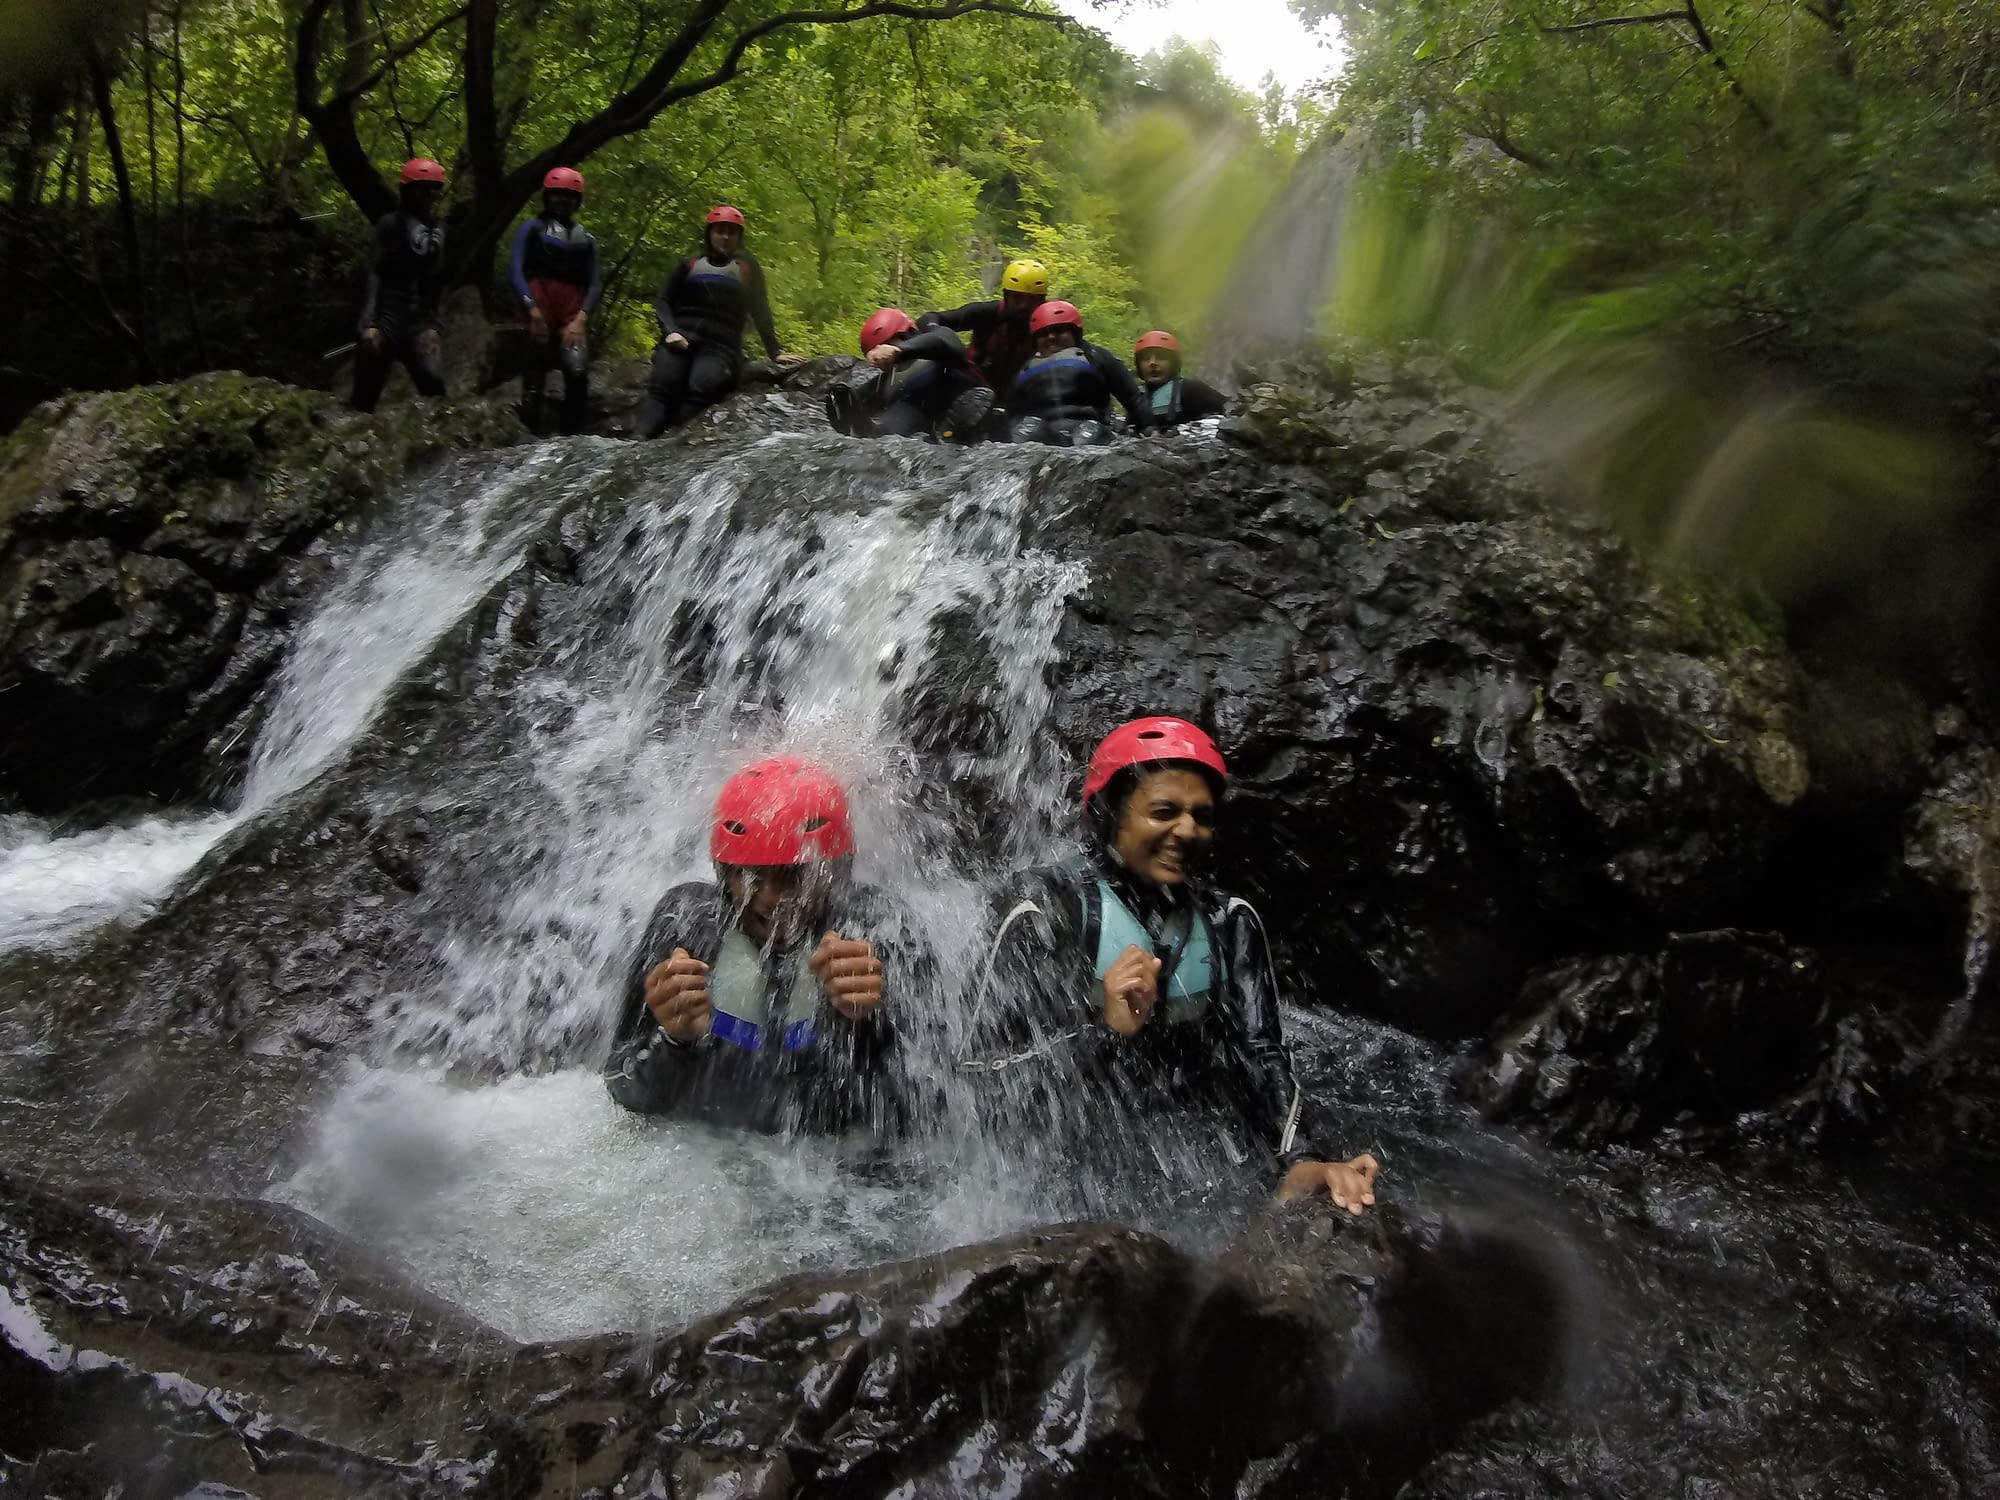 Two women getting splashed by white water during gorge walking